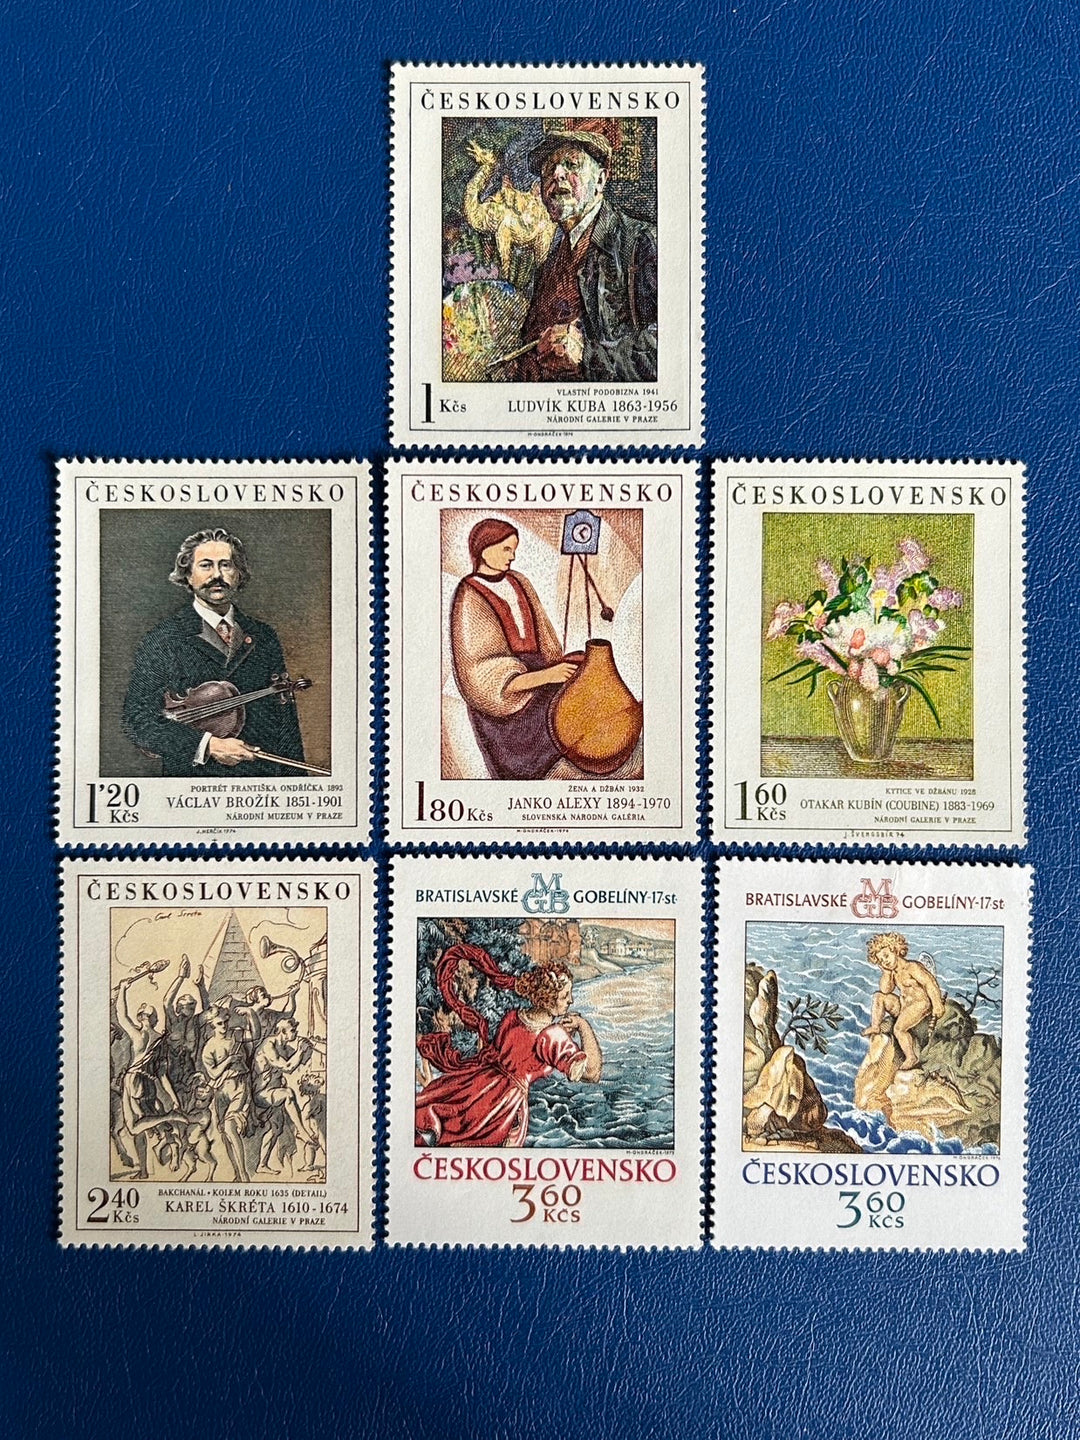 Czechoslovakia - Original Vintage Postage Stamps - 1974 - Art - for the collector, artist or crafter